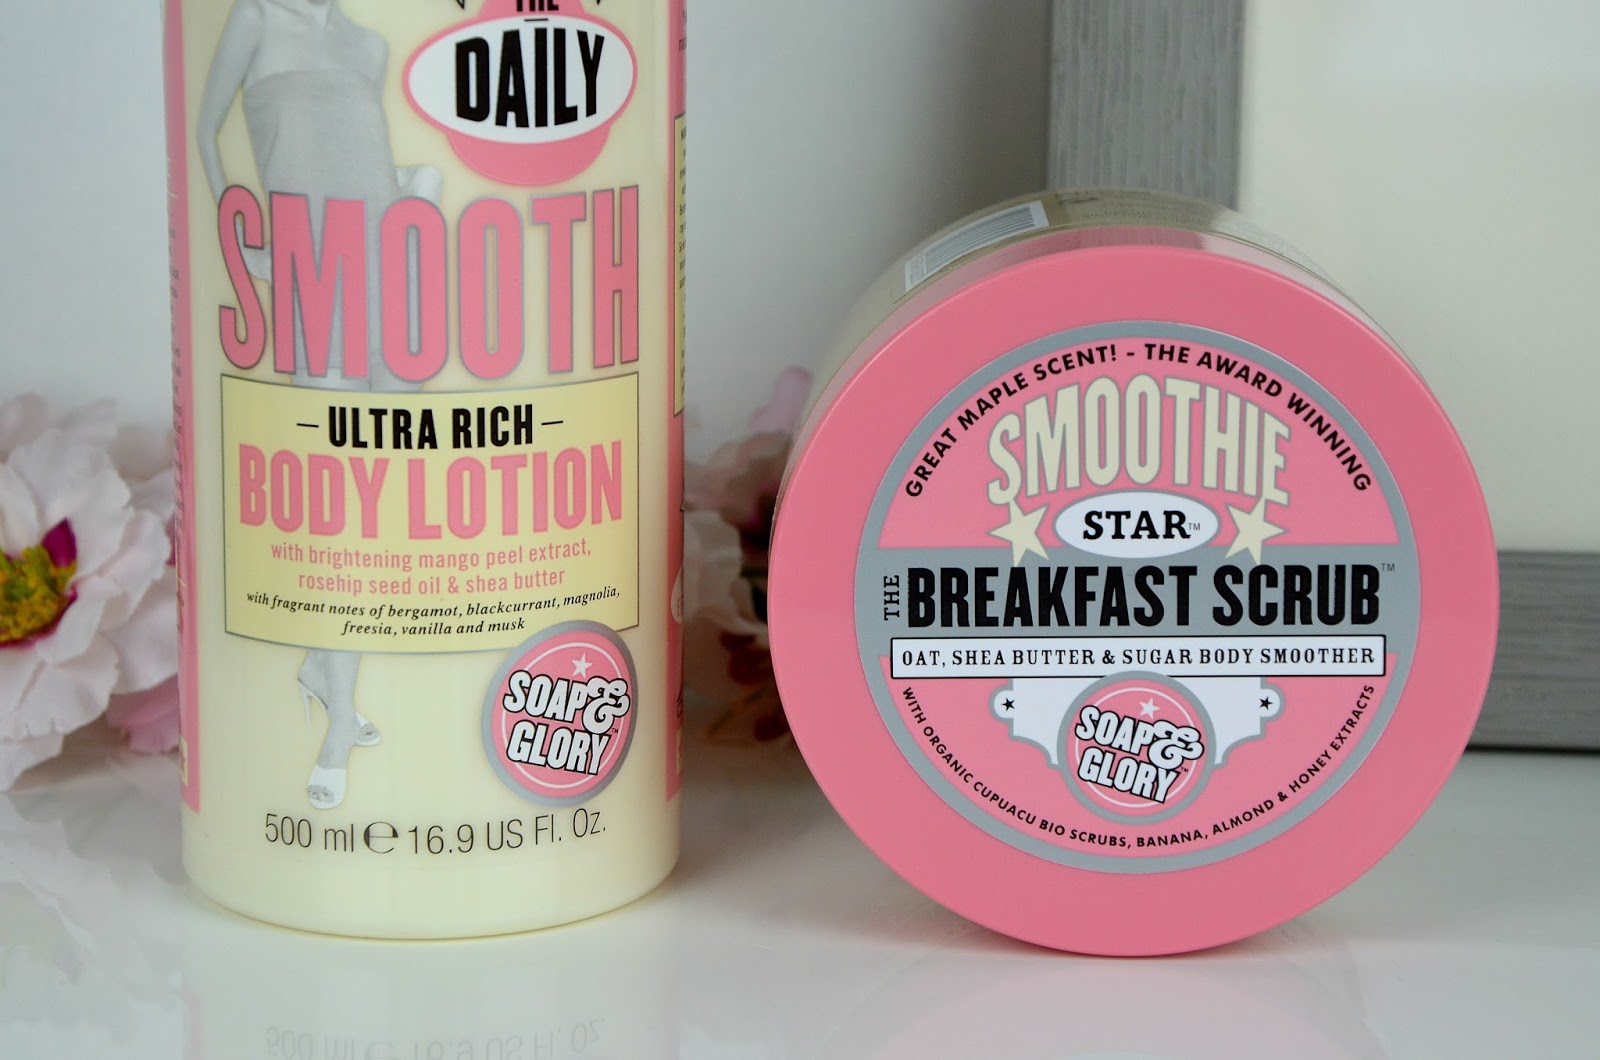 smoothie star breakfast scrub and the daily smooth ultra rich body lotion smoothie soap and glory